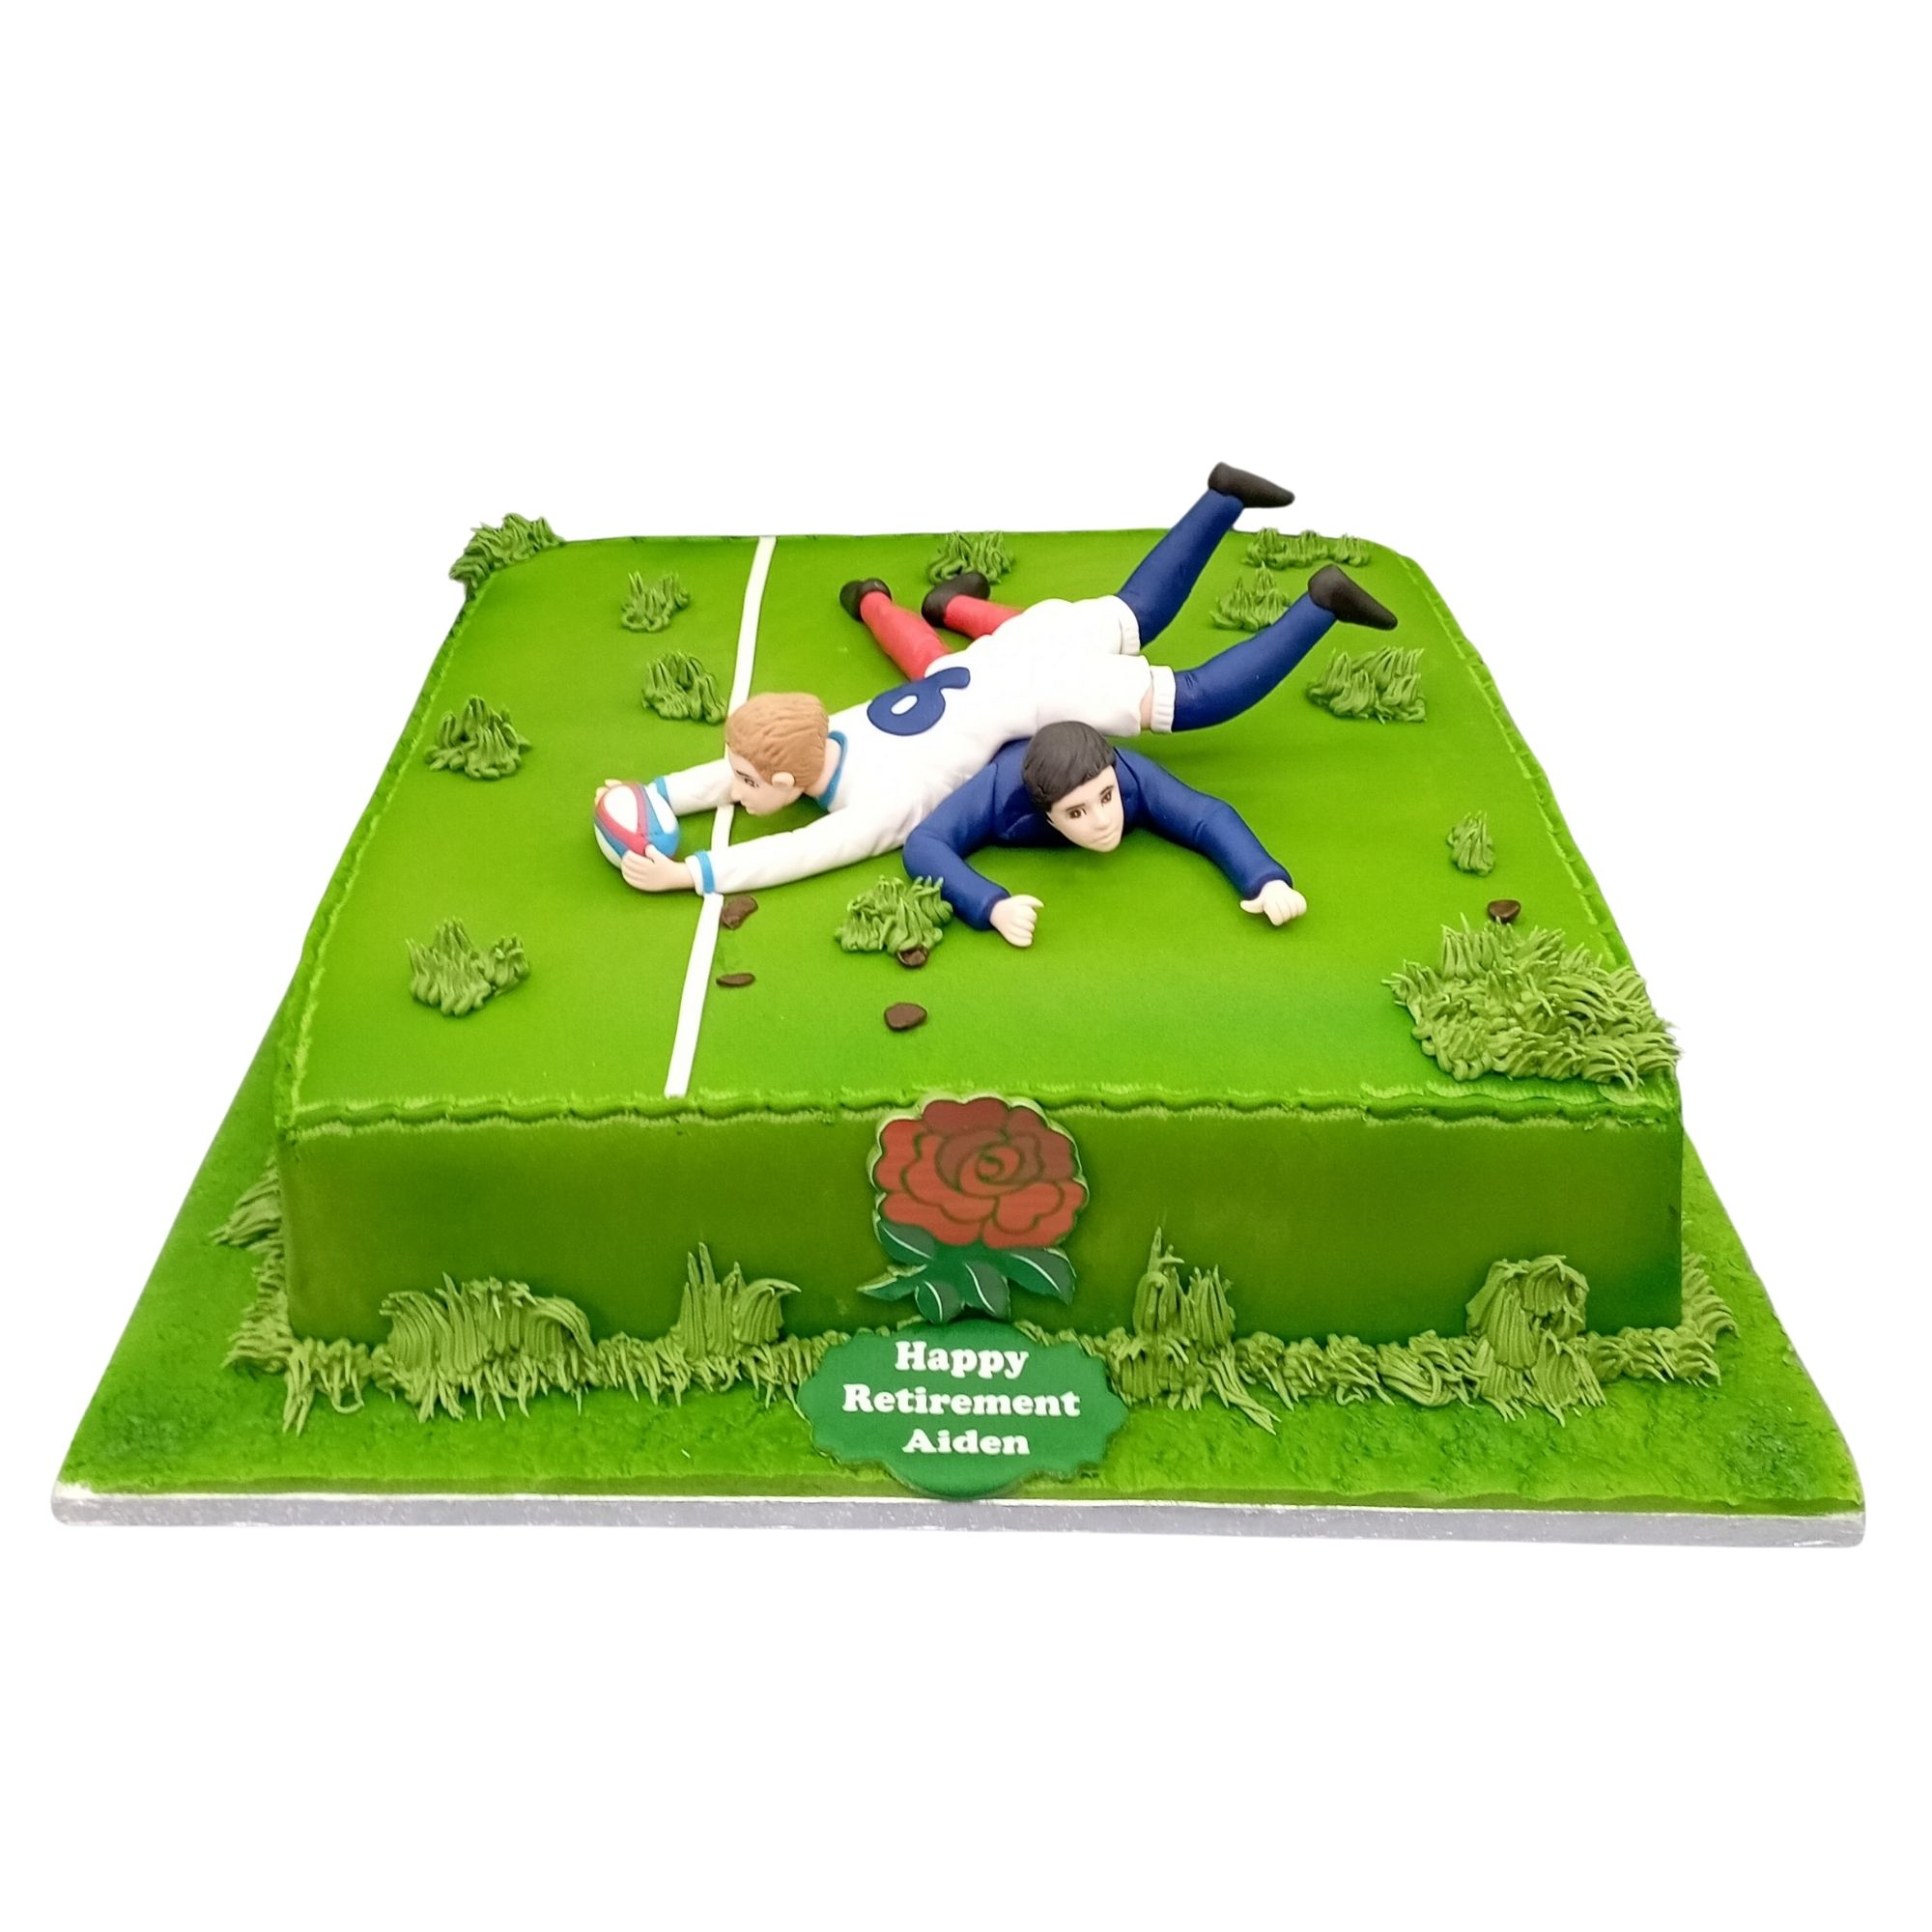 Rugby Match themed Birthday Cake